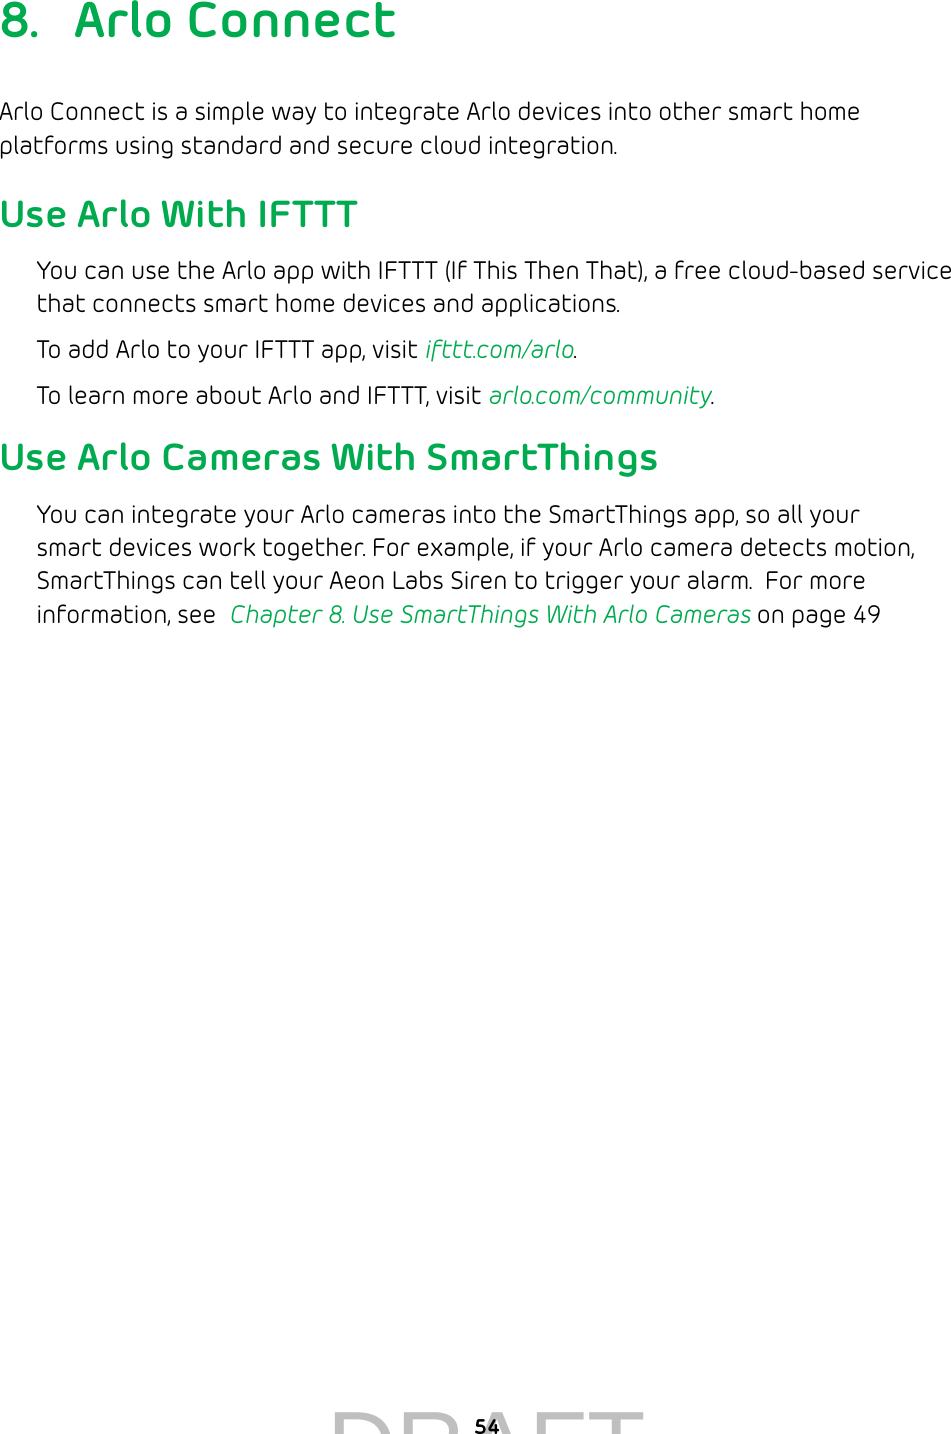 548.  Arlo ConnectArlo Connect is a simple way to integrate Arlo devices into other smart home platforms using standard and secure cloud integration. Use Arlo With IFTTTYou can use the Arlo app with IFTTT (If This Then That), a free cloud-based service that connects smart home devices and applications. To add Arlo to your IFTTT app, visit ifttt.com/arlo.To learn more about Arlo and IFTTT, visit arlo.com/community.Use Arlo Cameras With SmartThingsYou can integrate your Arlo cameras into the SmartThings app, so all your smart devices work together. For example, if your Arlo camera detects motion, SmartThings can tell your Aeon Labs Siren to trigger your alarm.  For more information, see  Chapter 8. Use SmartThings With Arlo Cameras on page 49DRAFT